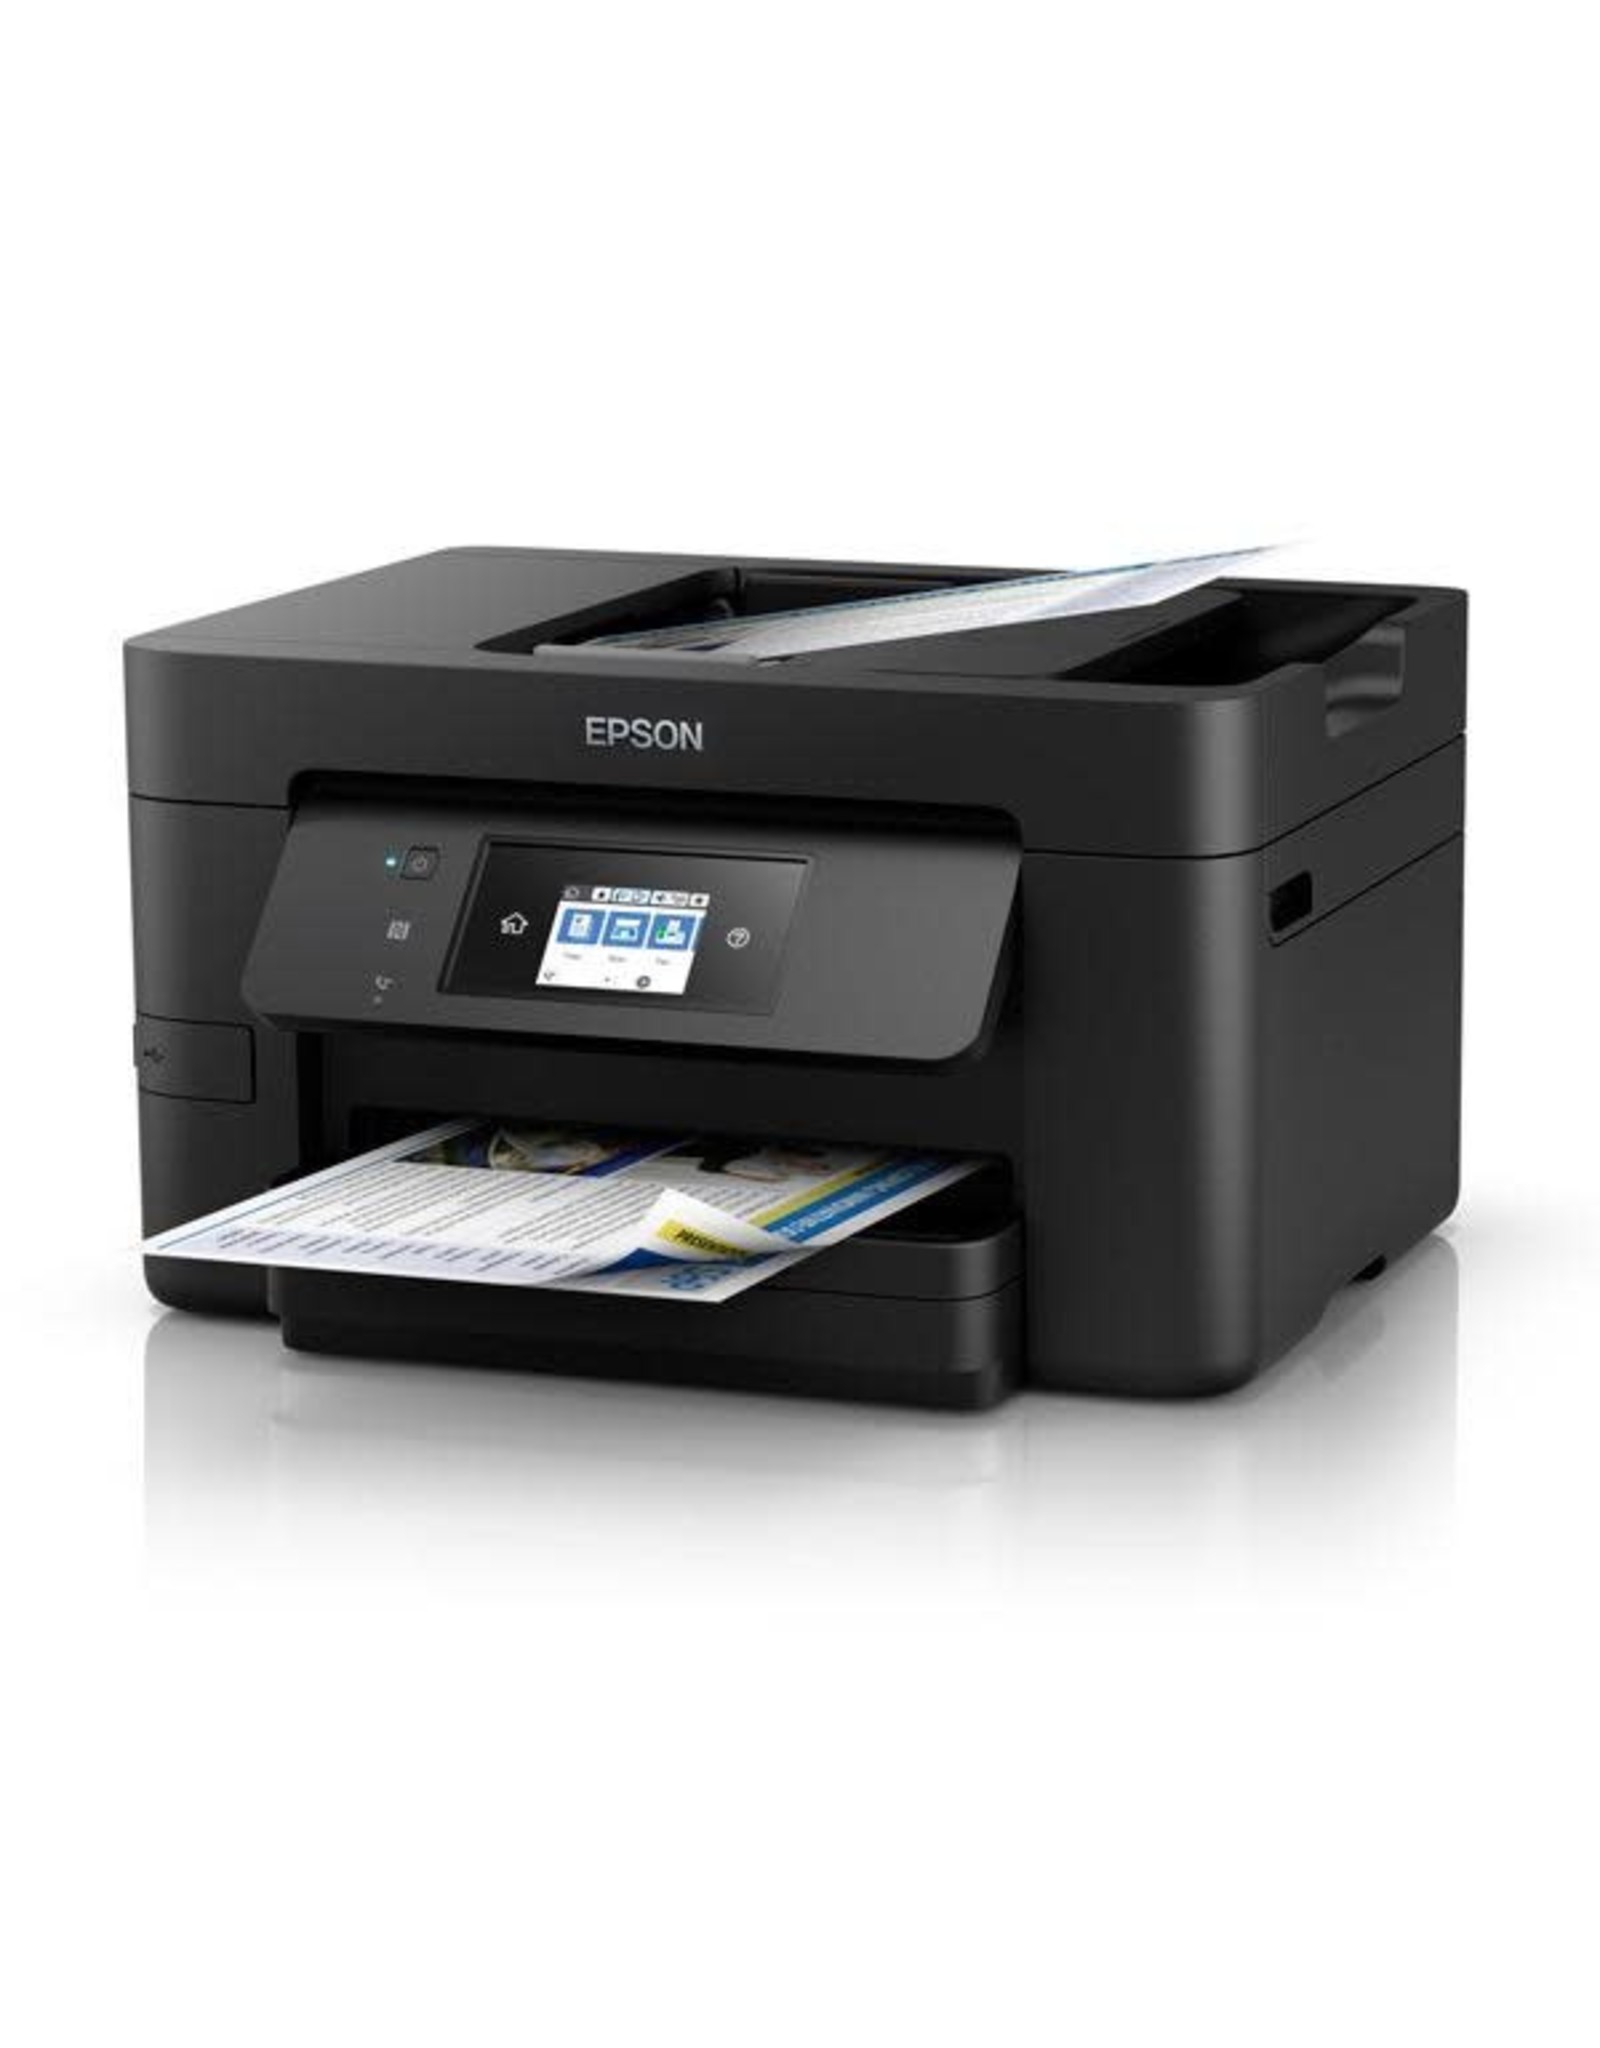 Epson EPSON WorkForce Pro WF-3825 Colour Multifunction Inkjet Print/Copy/Scan/Fax with Ethernet and WiFi AIRPRINT